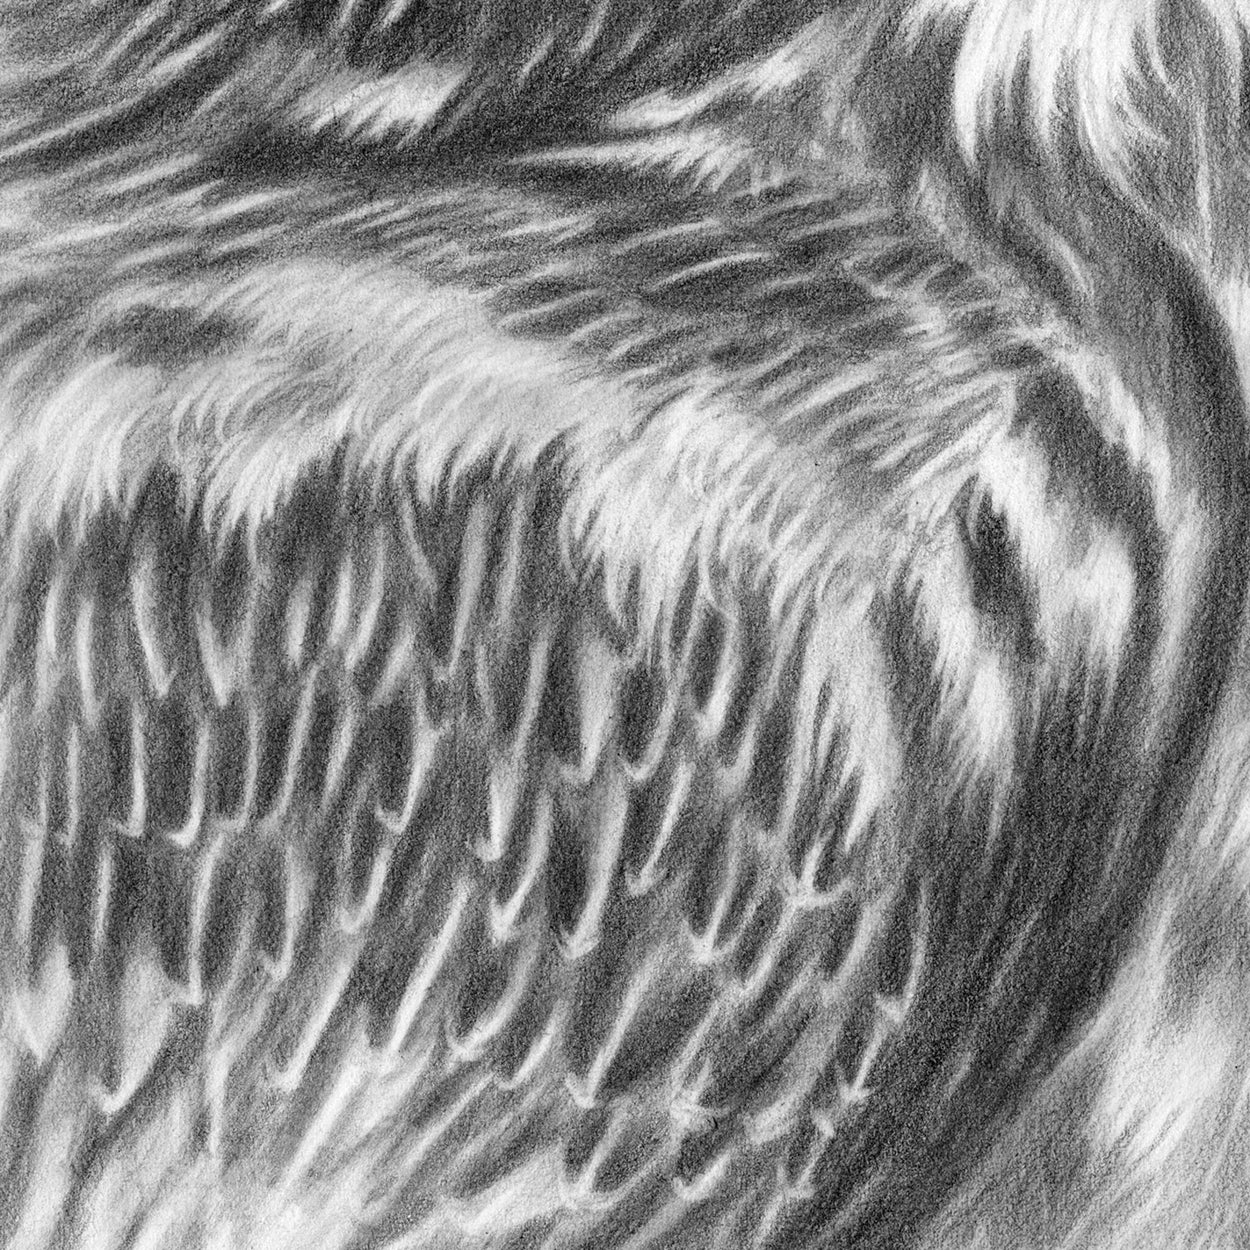 Bearded Vulture Drawing Close-up 4 - The Thriving Wild - Jill Dimond